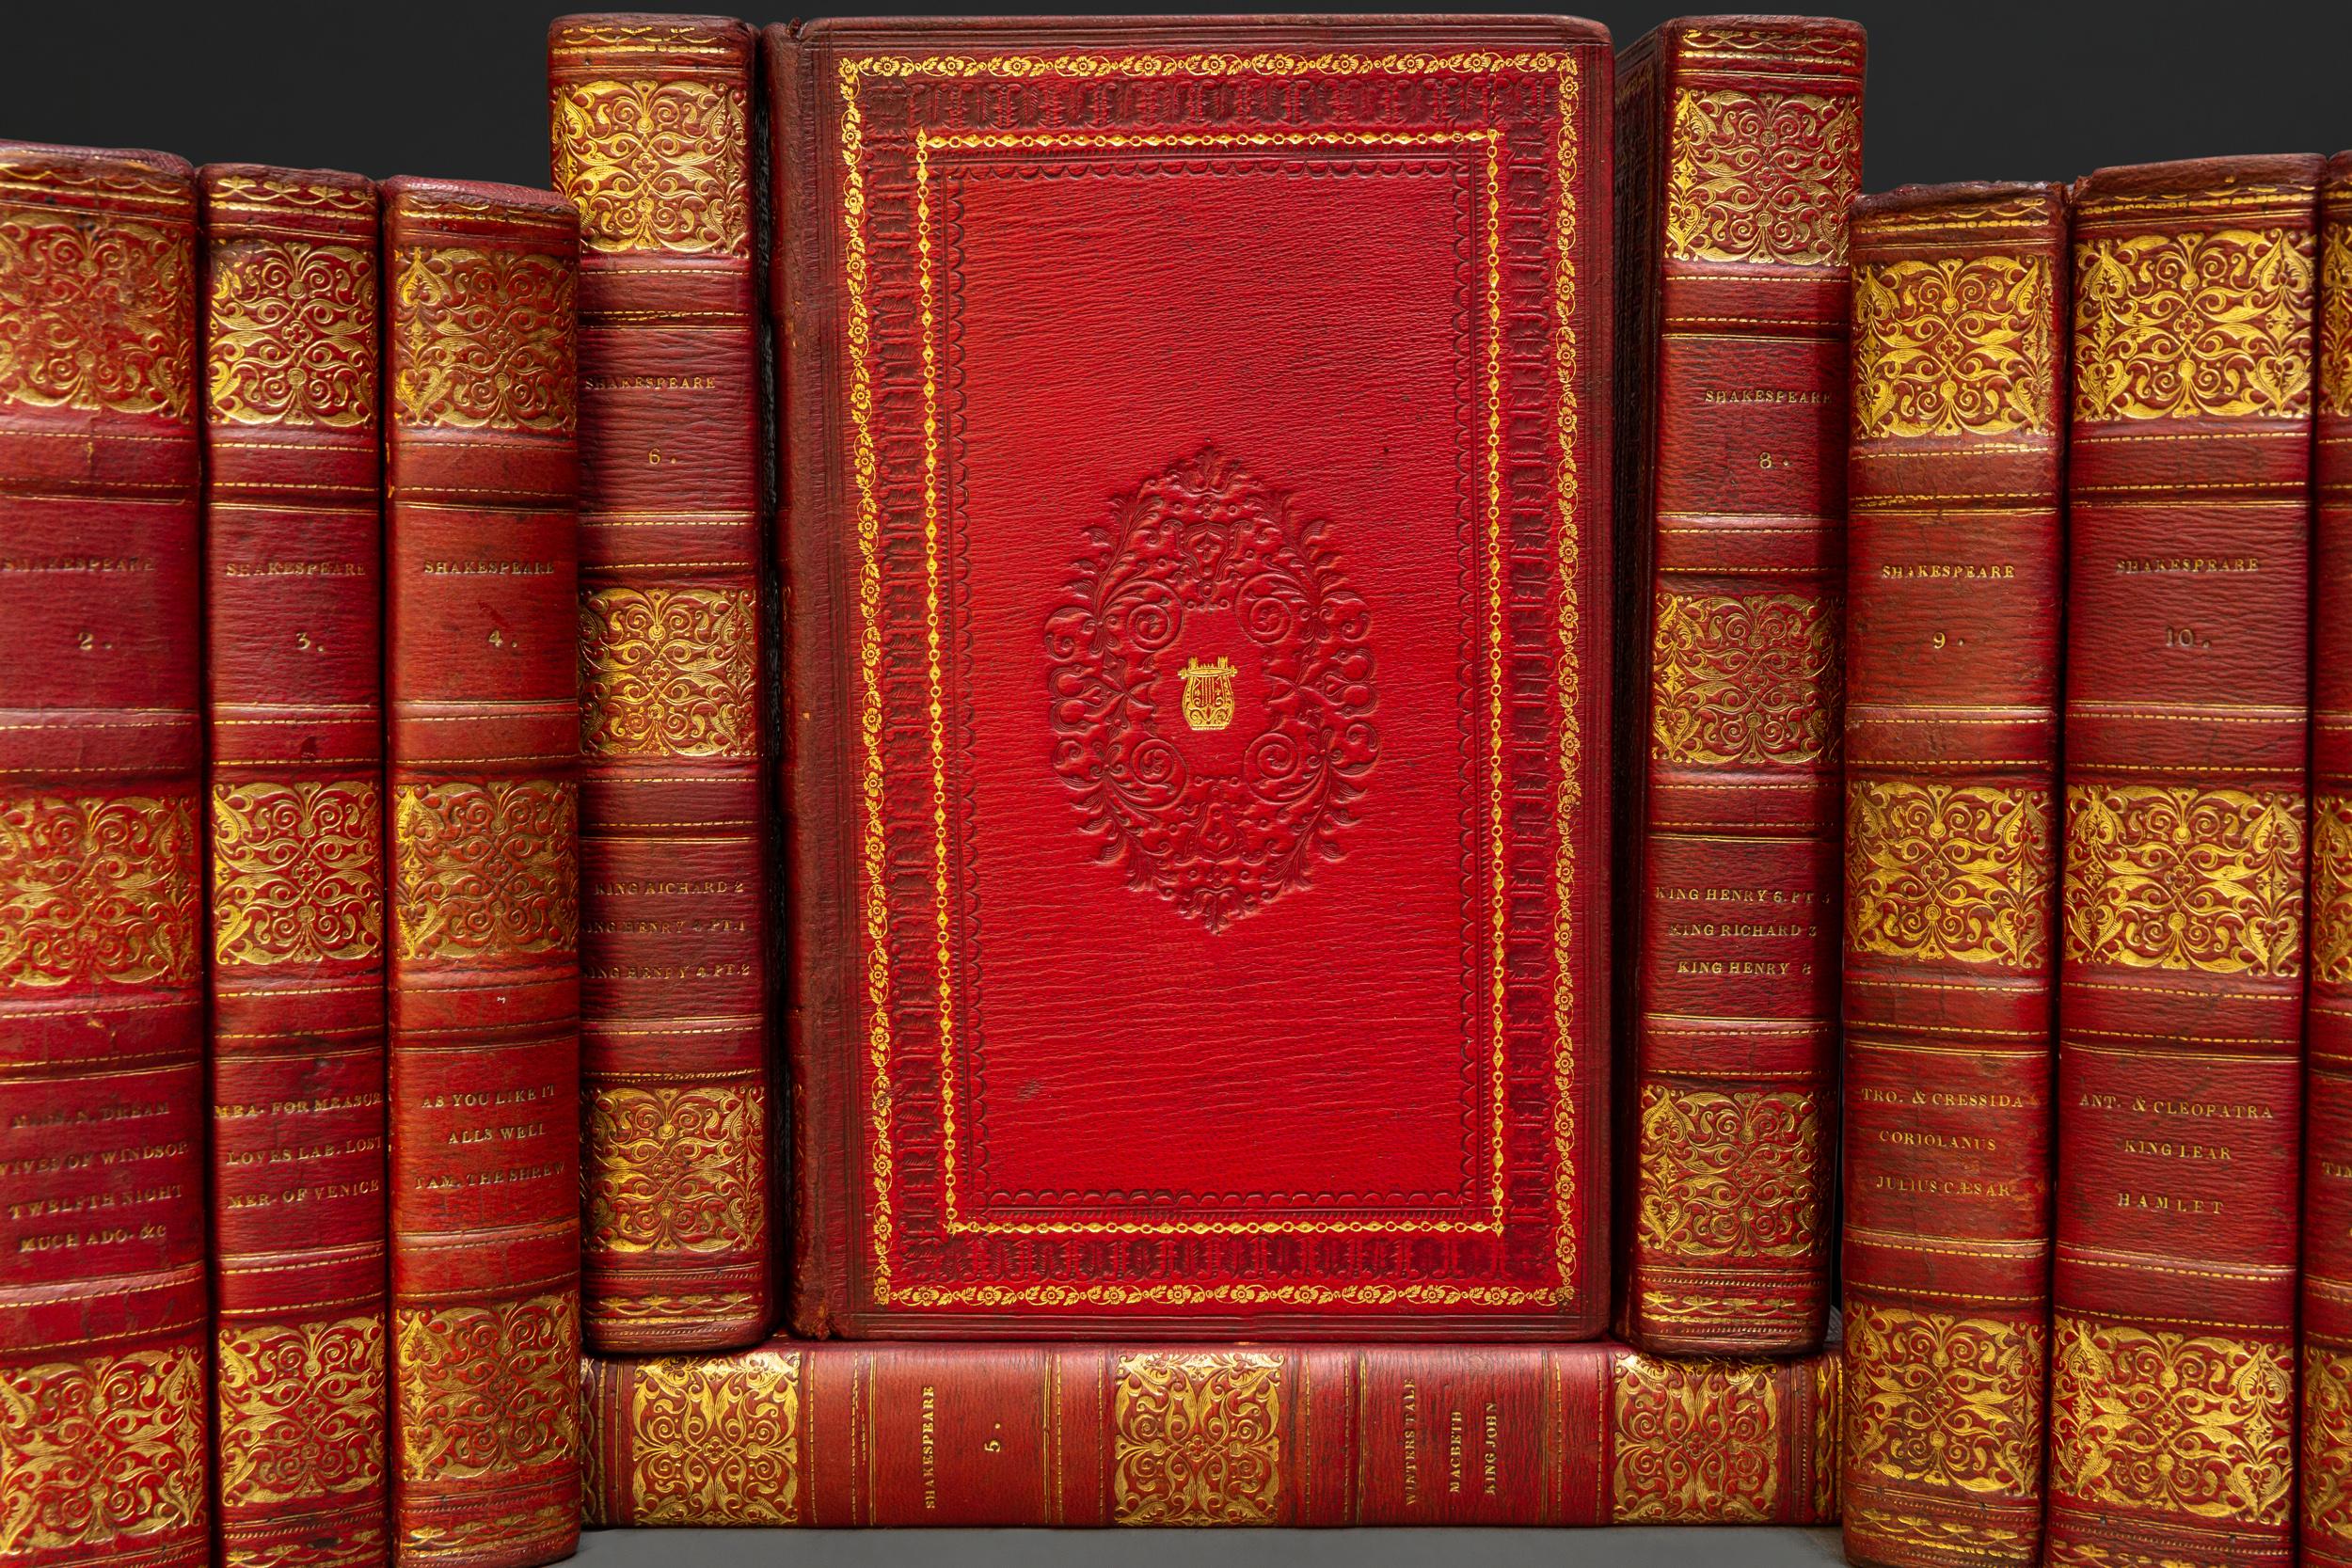 12 Volumes. Mr. Rowe. The Dramatic Works of William Shakespeare. Bound in red morocco. Blind tooling on covers. Marbled endpapers. All edges gilt. Raised bands. Gilt on spine. Published: London: Thomas Tegg 1812.